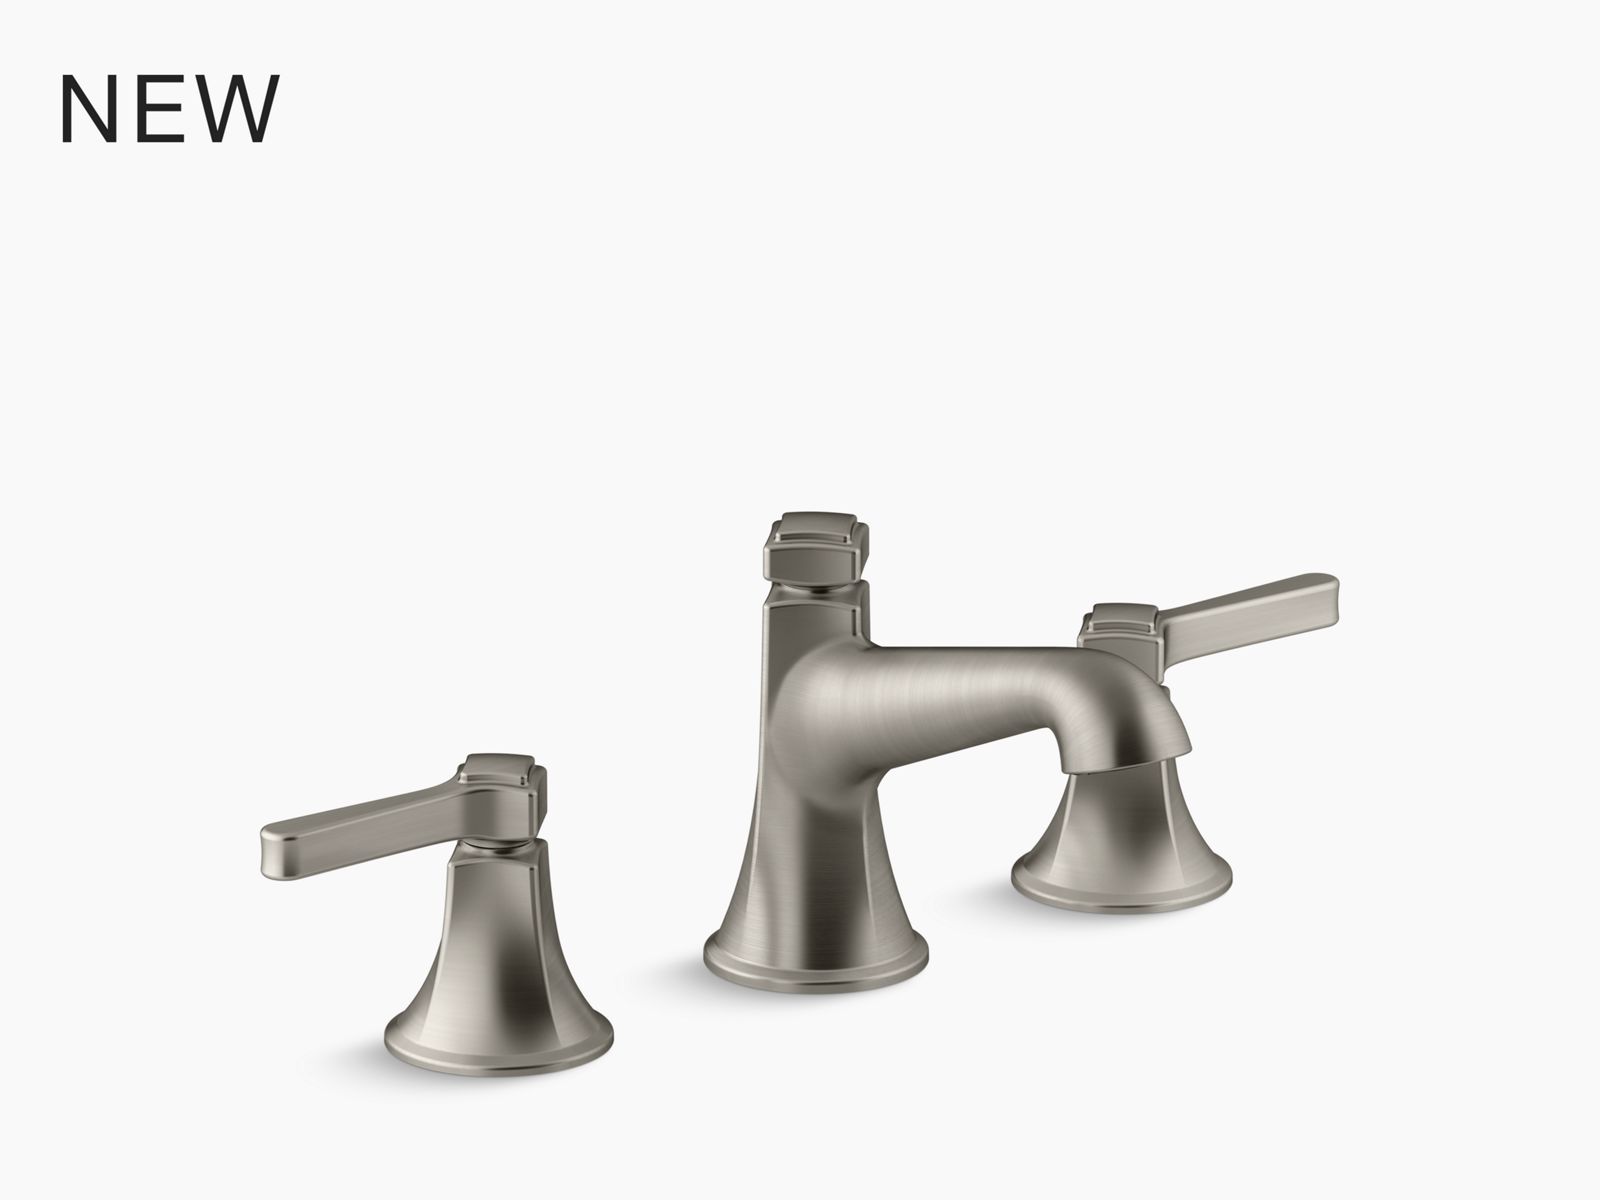 STATEMENT Iconic Dual Shower Arm